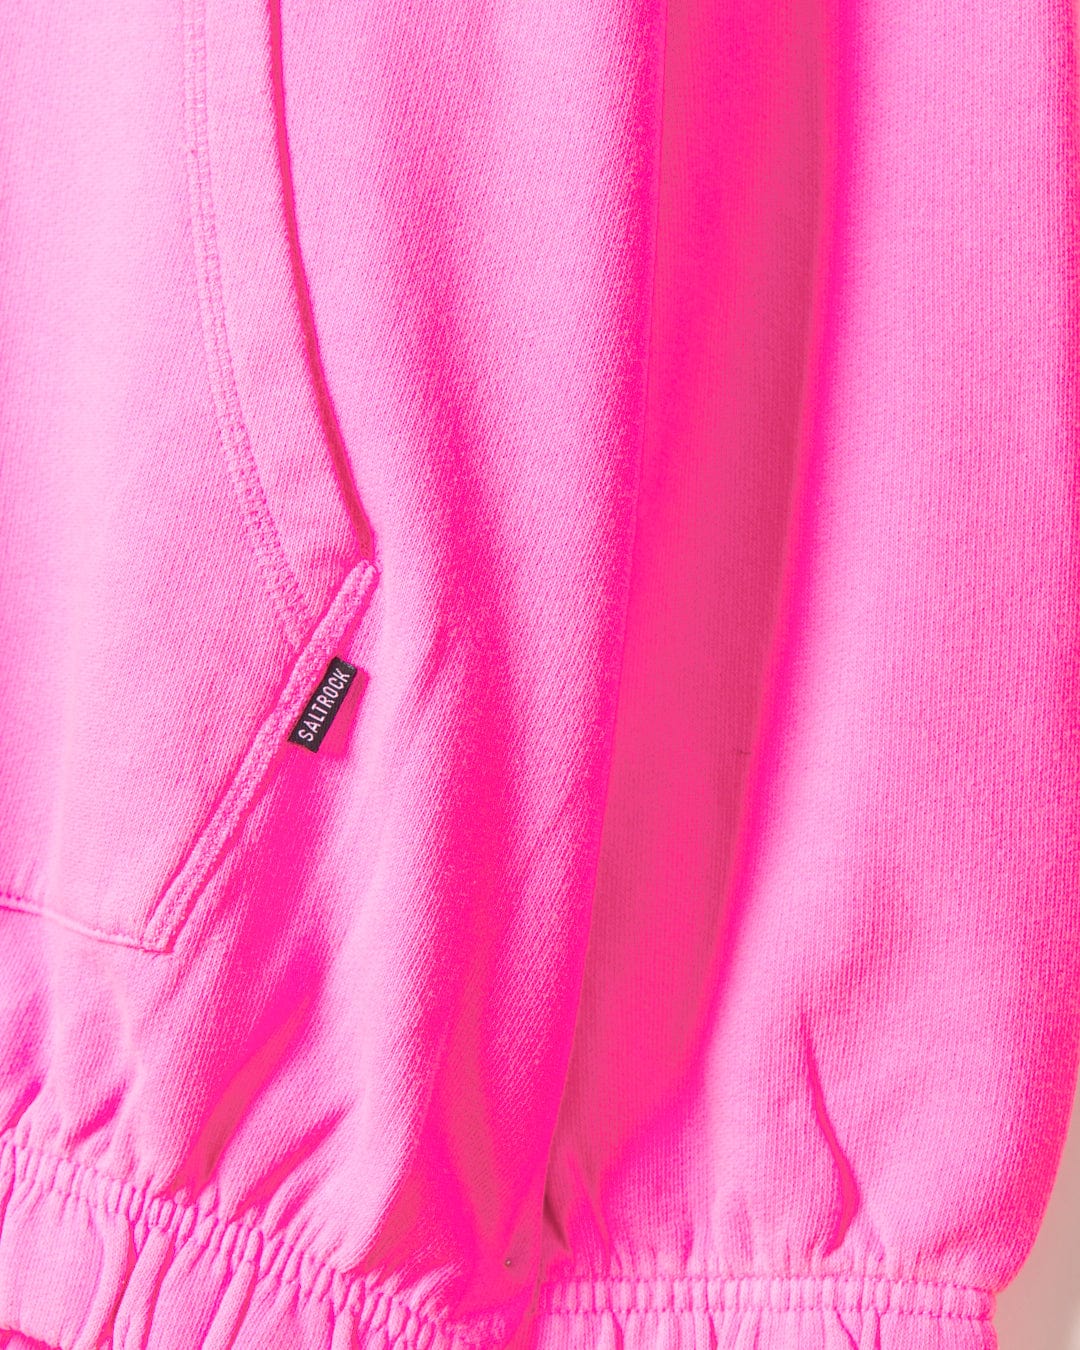 Close-up of a bright pink sweatshirt showcasing a pocket and a small black tag with text sewn into the seam near the bottom hem, made from 100% cotton. The product is the Instow - Womens Pop Hoodie - Pink by Saltrock.